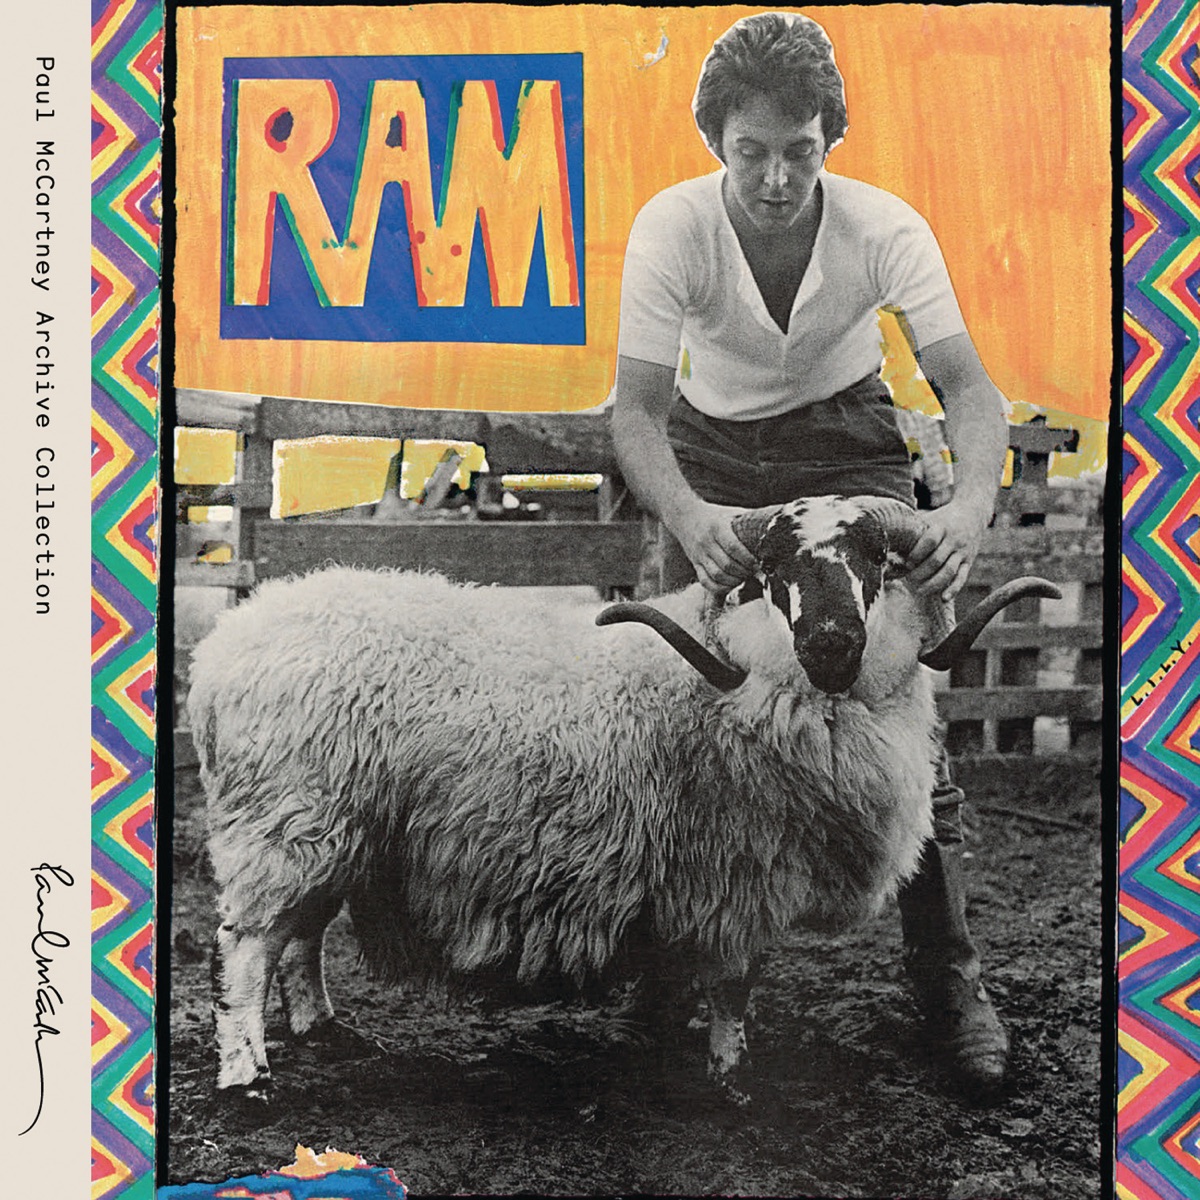 Ram (Archive Collection) by Paul & Linda McCartney on Apple Music